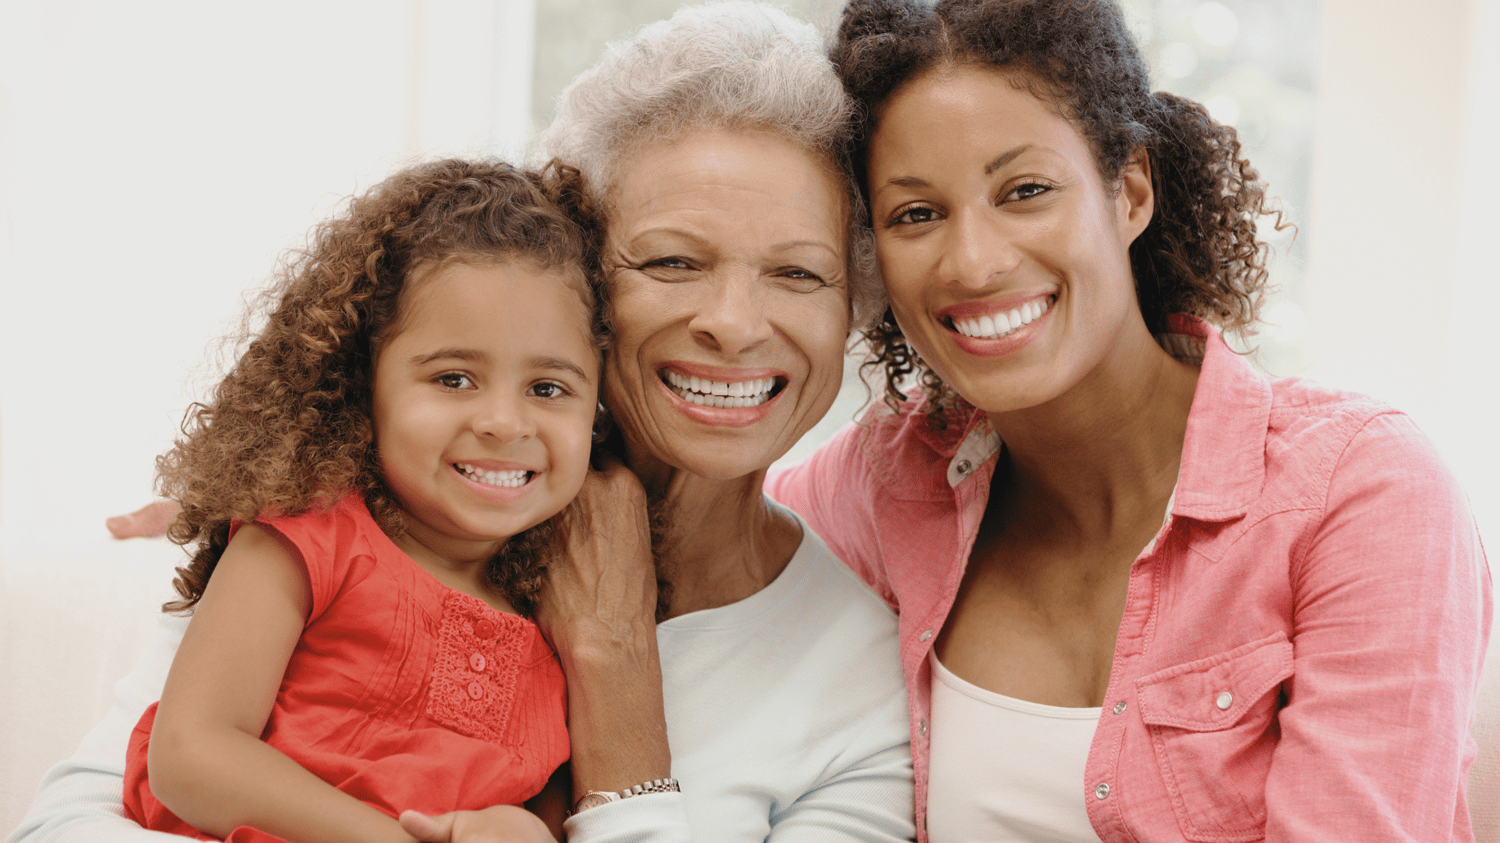 MOTHERS & MONEY: WHY FINANCIAL PLANNING IS ESSENTIAL